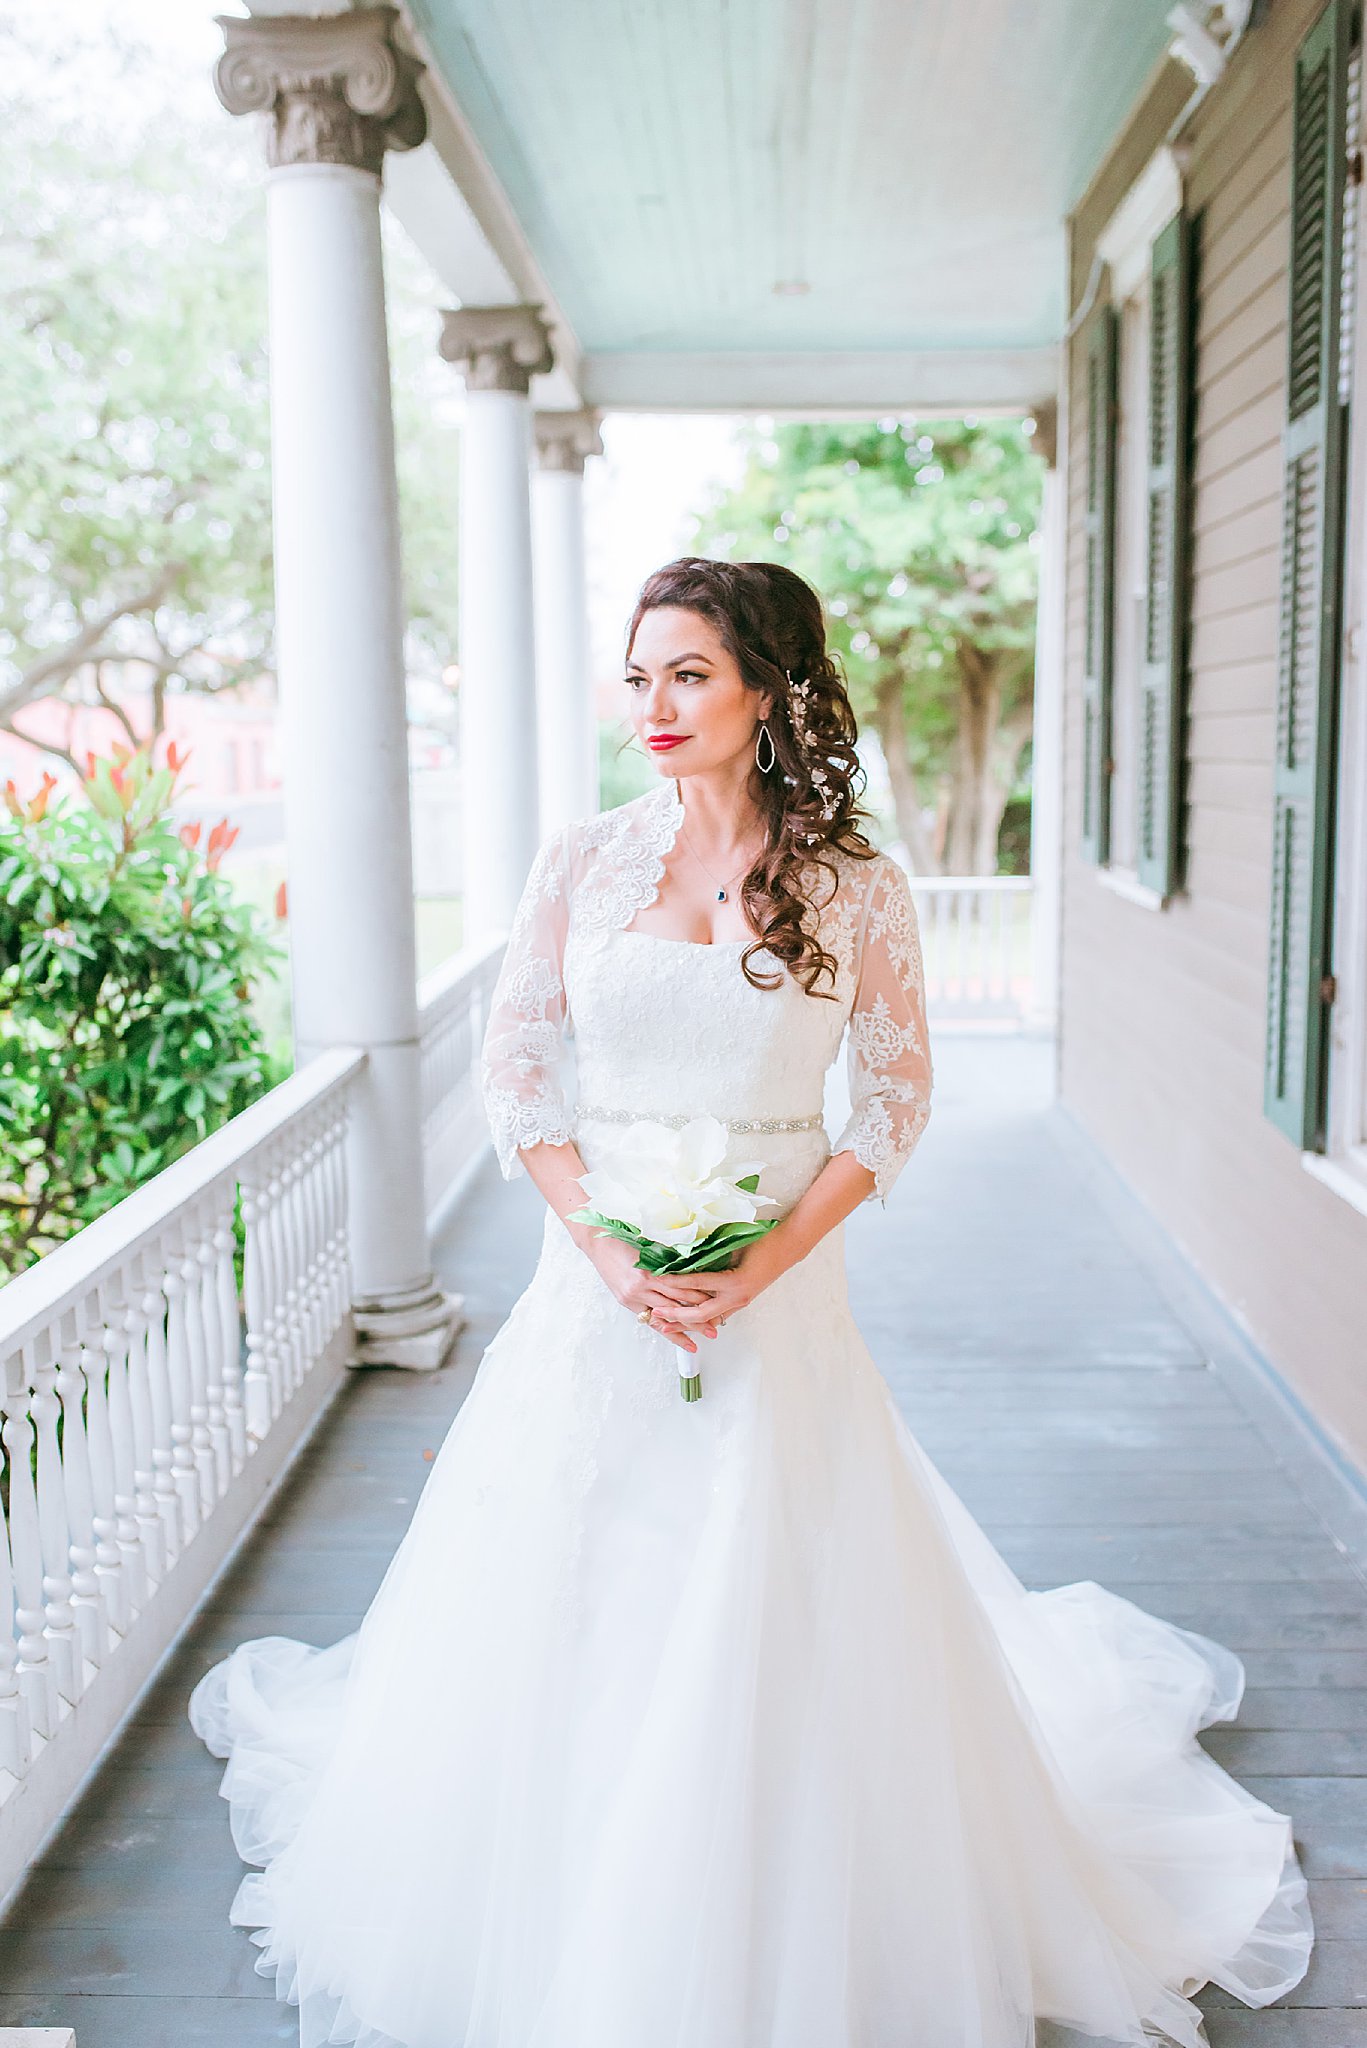 Bride in wedding dress holding a white bouquet on the patio of the Heritage Park house in Corpus Christi, Texas